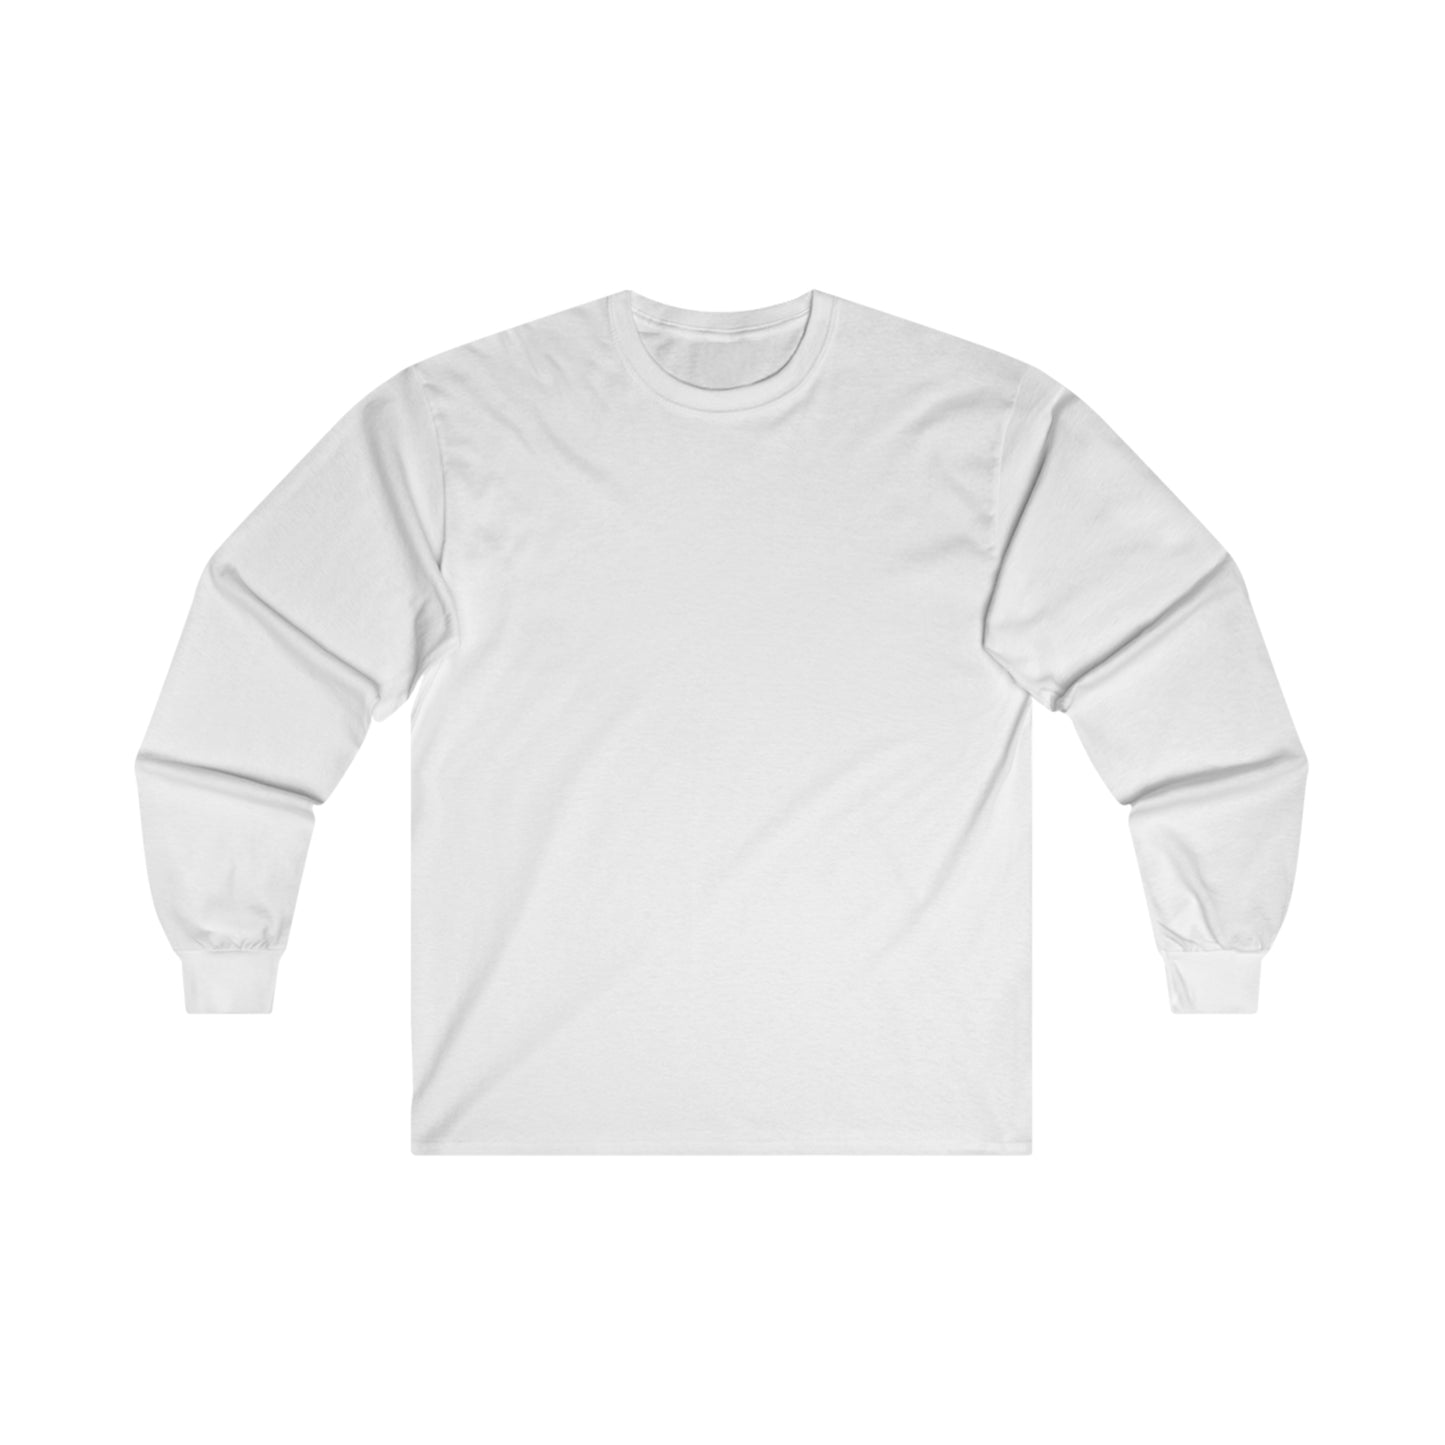 Abandoned & Forgotten Places "White Print" Long Sleeve Cotton T-Shirt